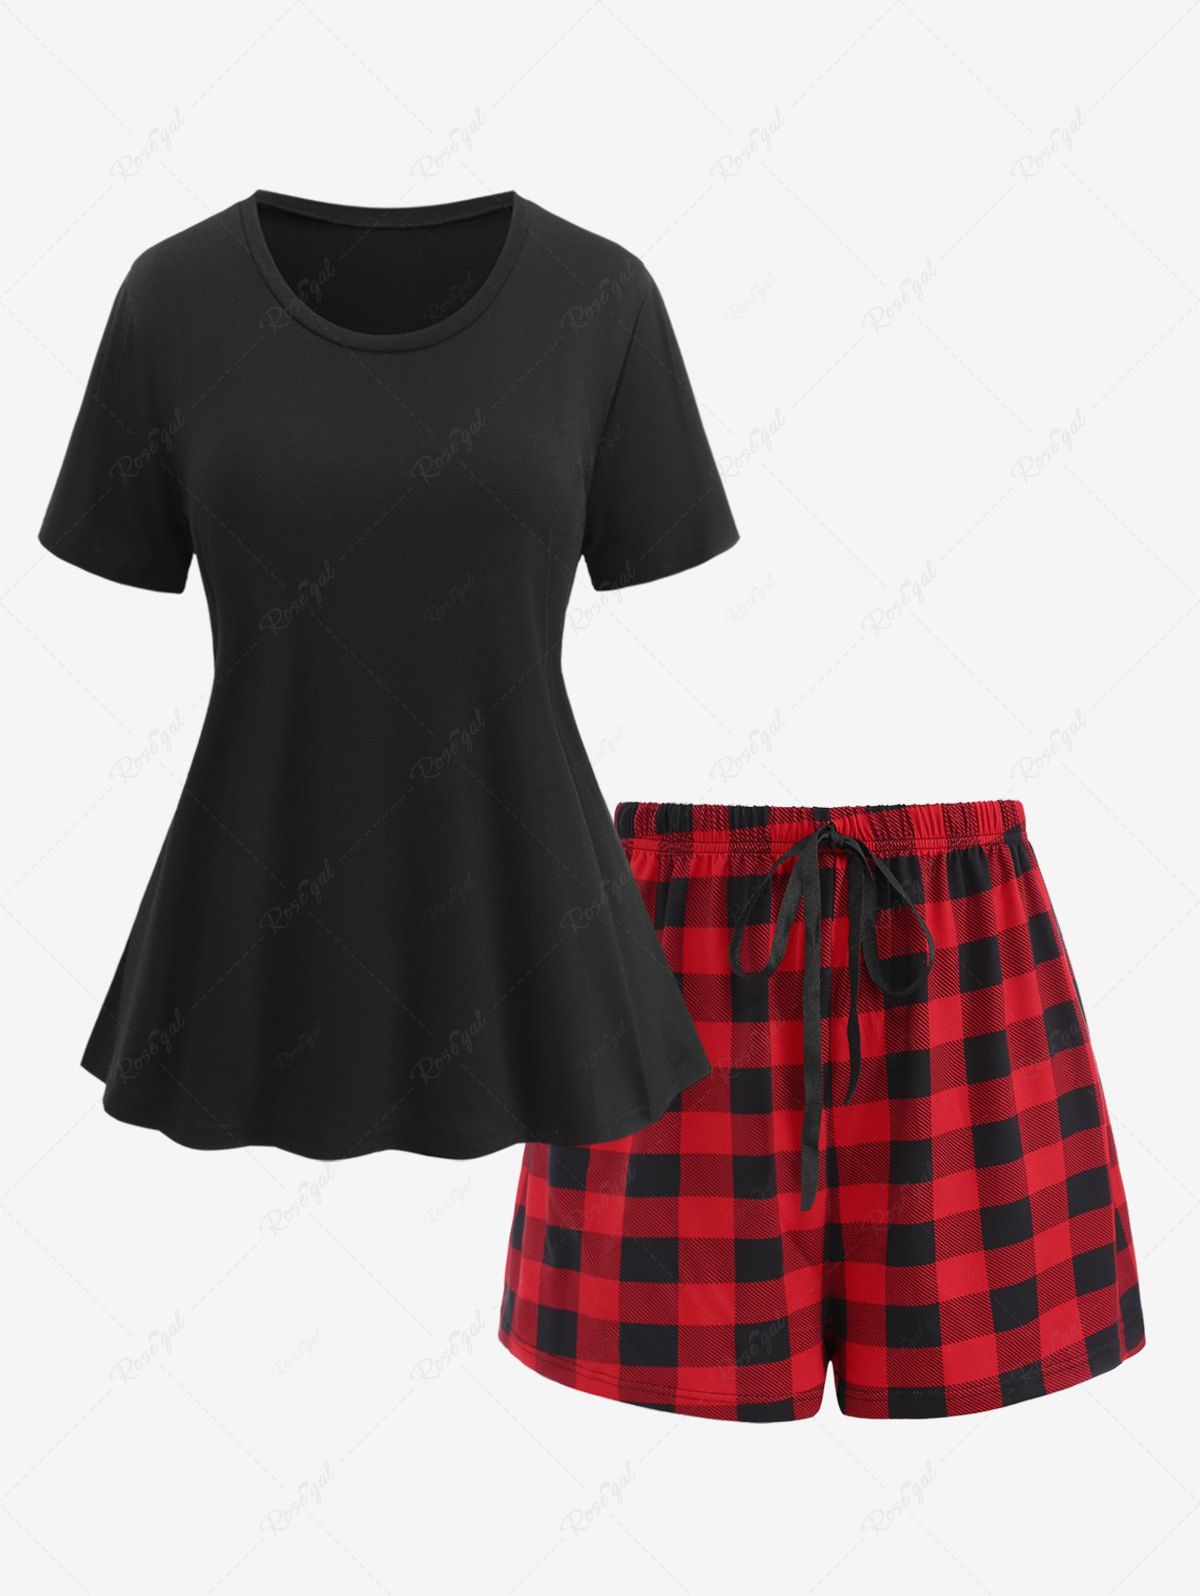 Buy Plus Size Solid Color Top and Plaid Bowknot Tied Shorts Pajama Set  